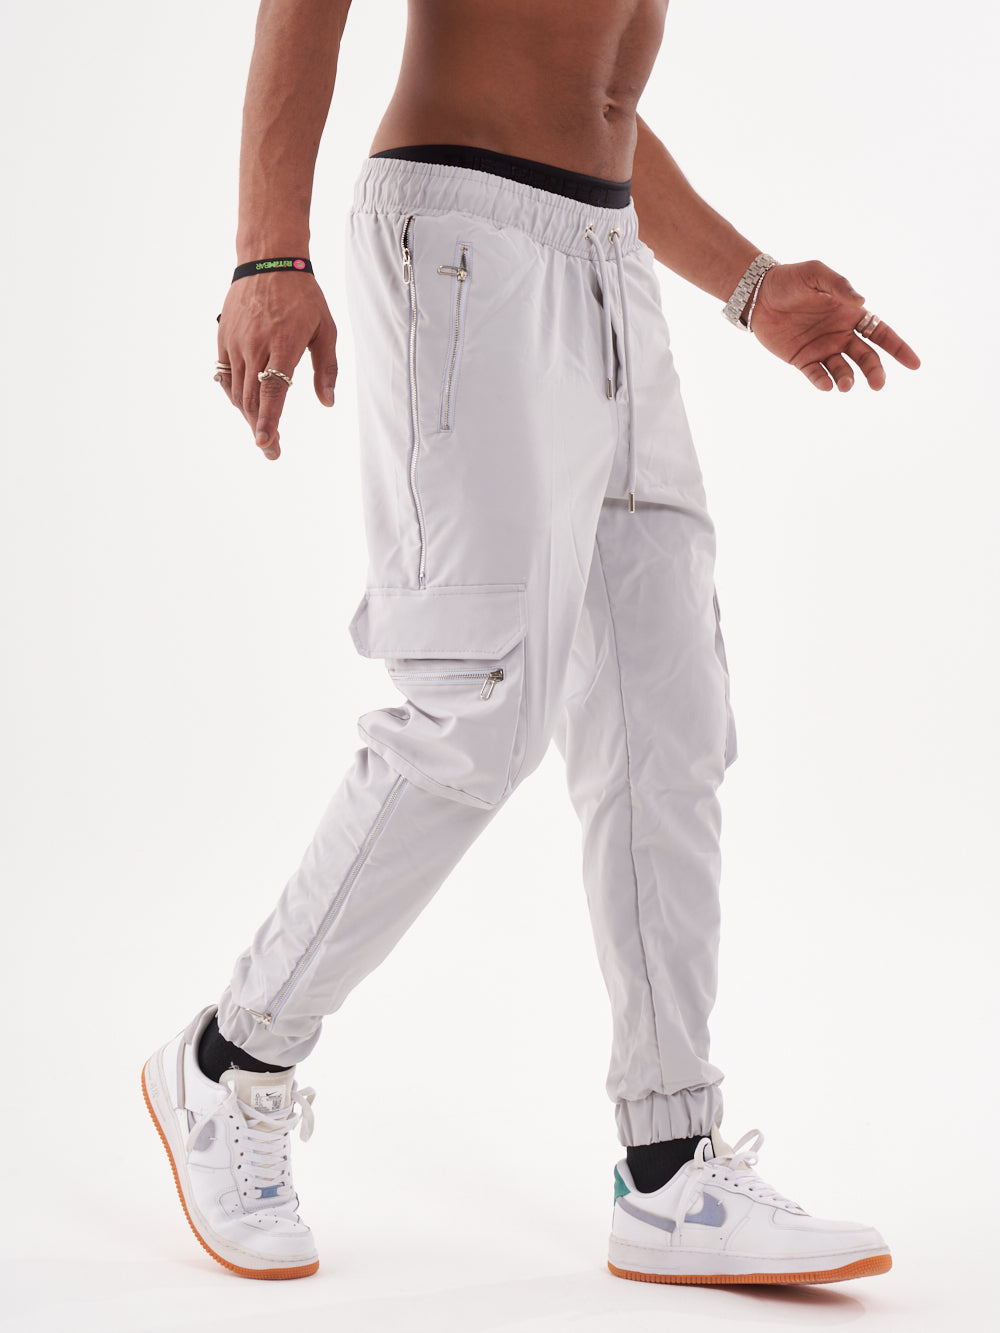 A man wearing a pair of ANARCHY JOGGERS and sneakers.